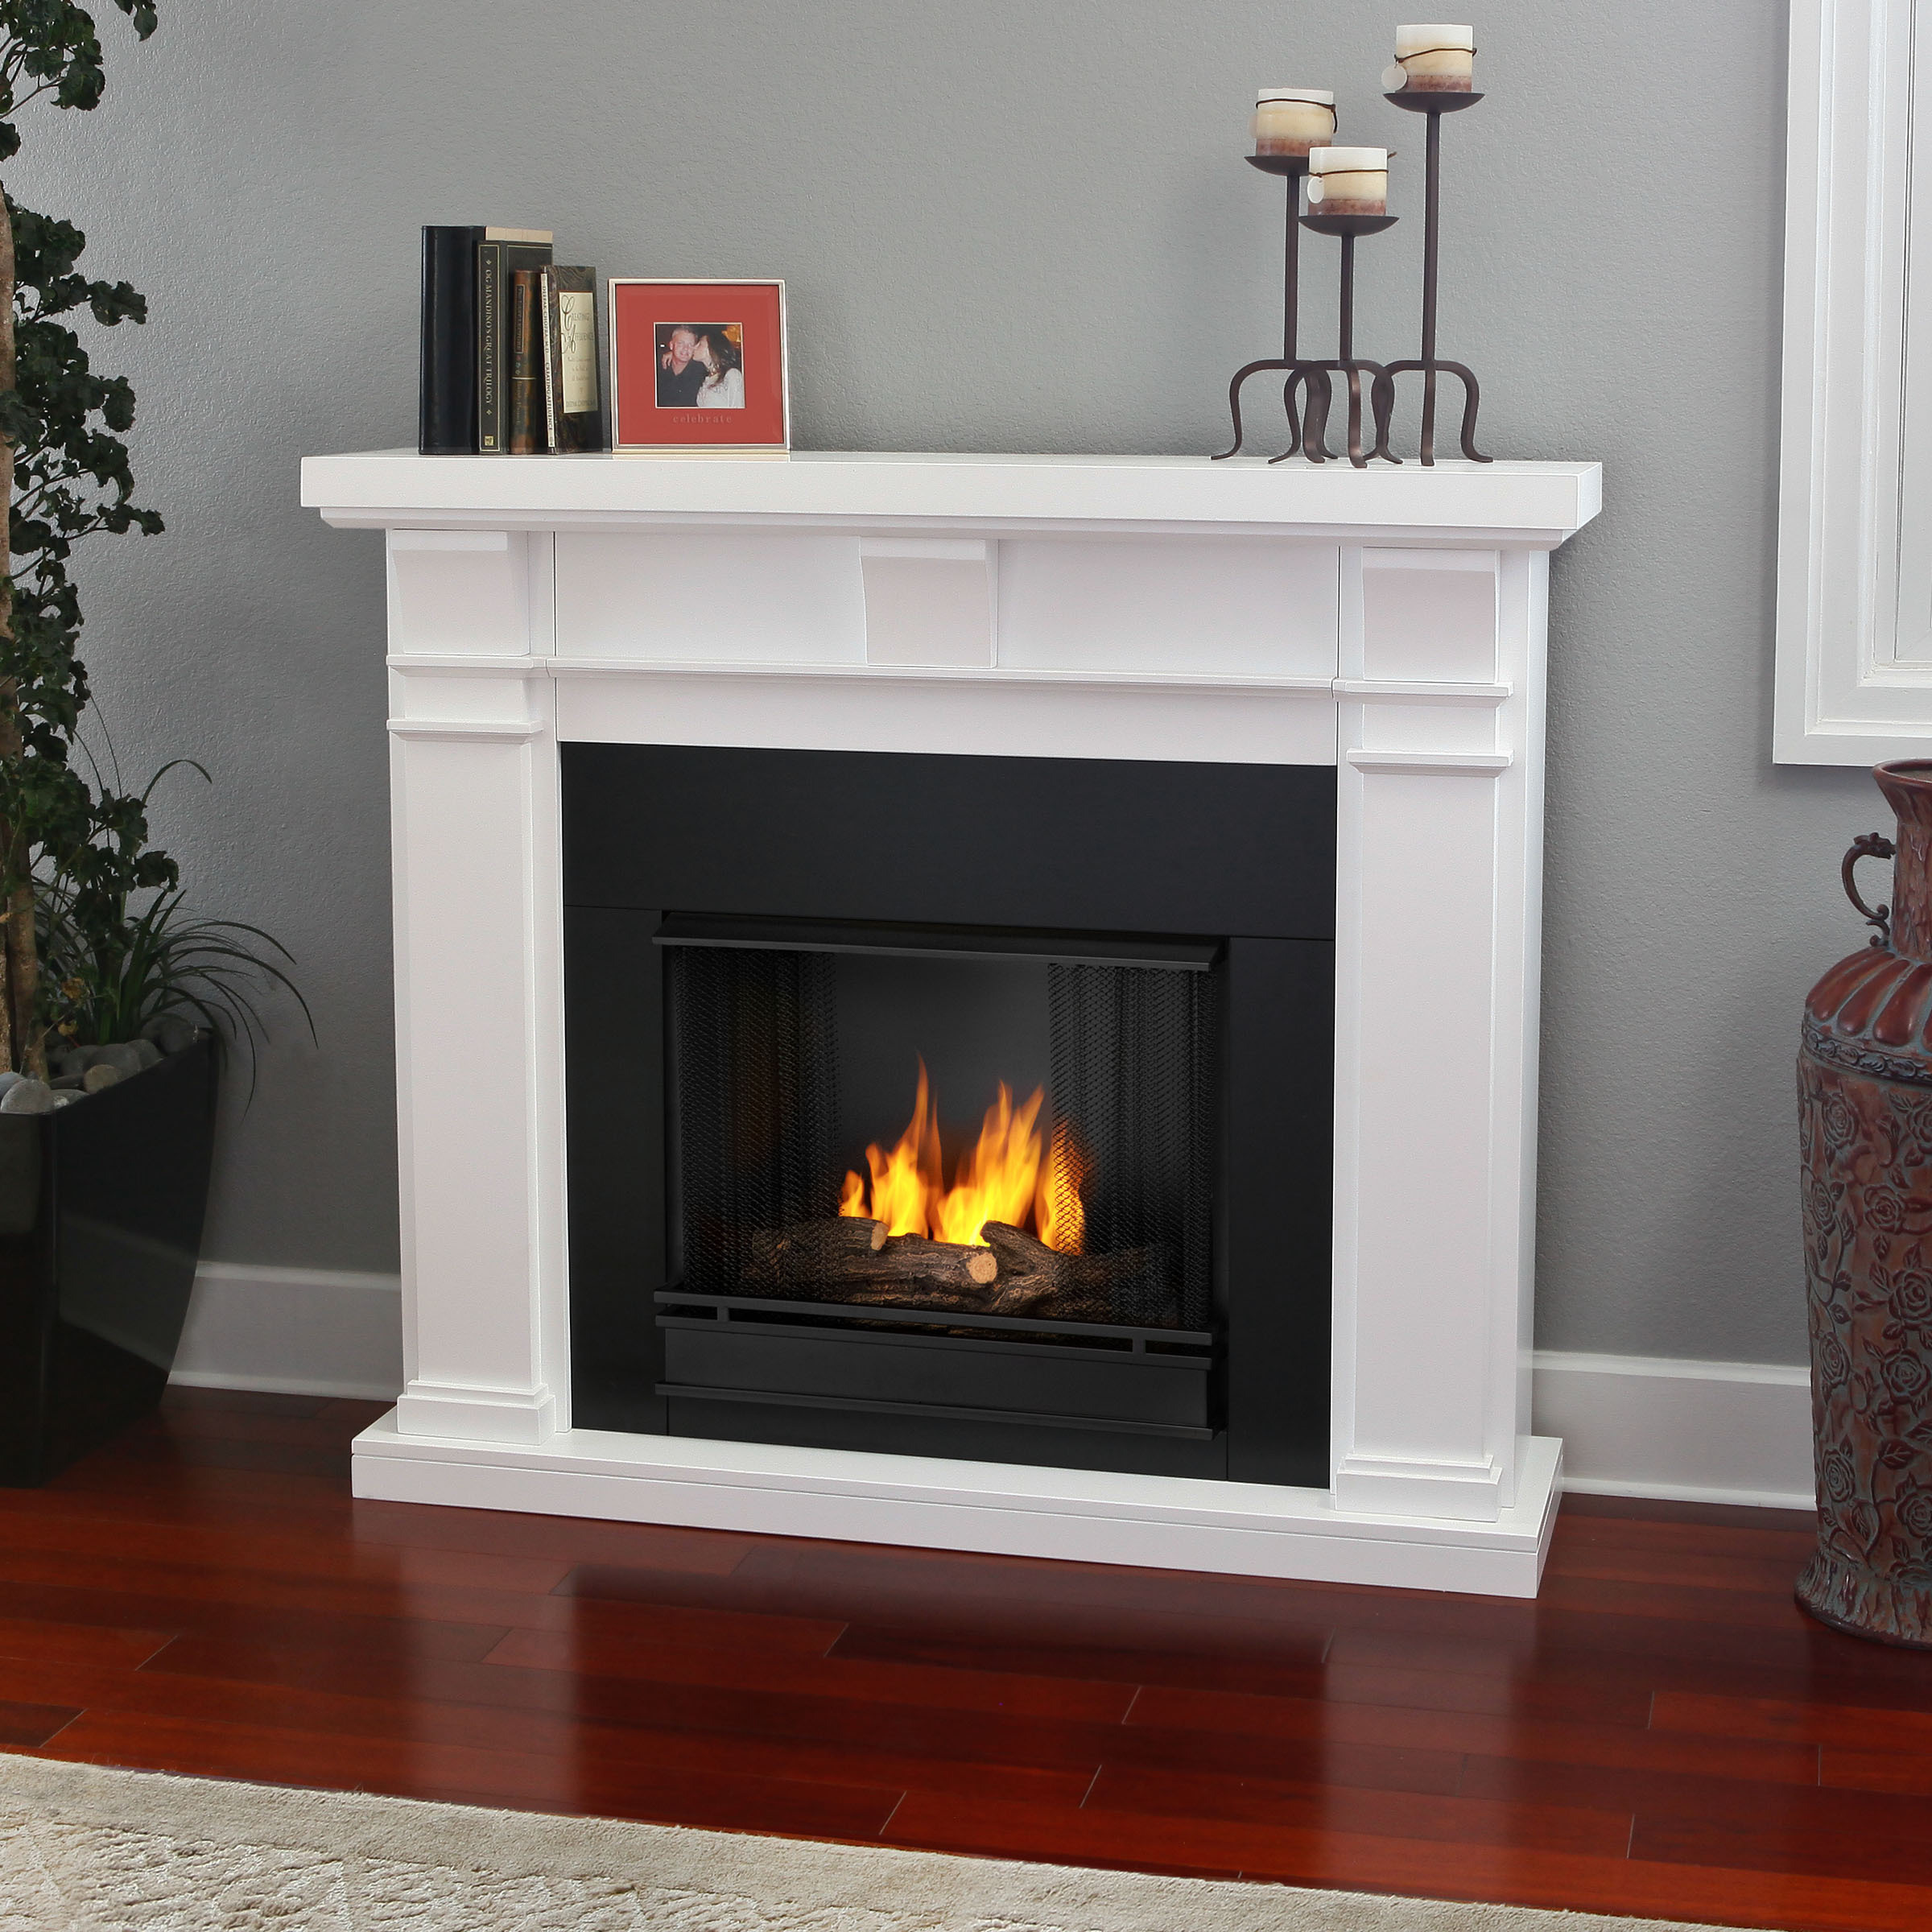 Gel Fuel Fireplace Insert Beautiful Real Flame Gel Fuel Fireplace Charming Fireplace